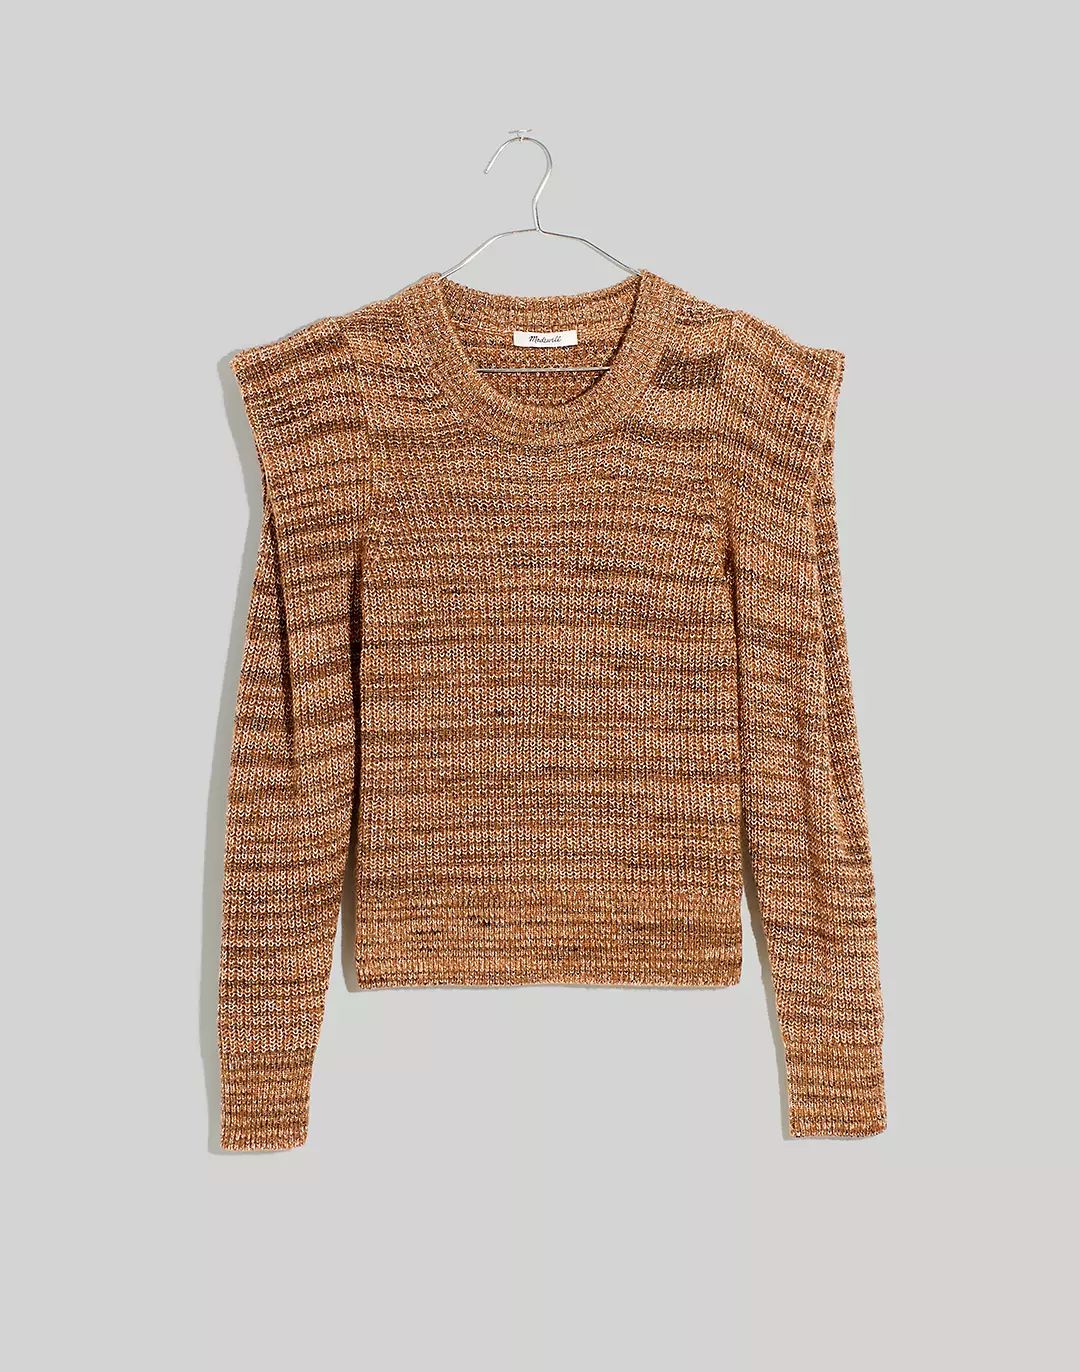 Space-Dyed Prentiss Pullover Sweater | Madewell